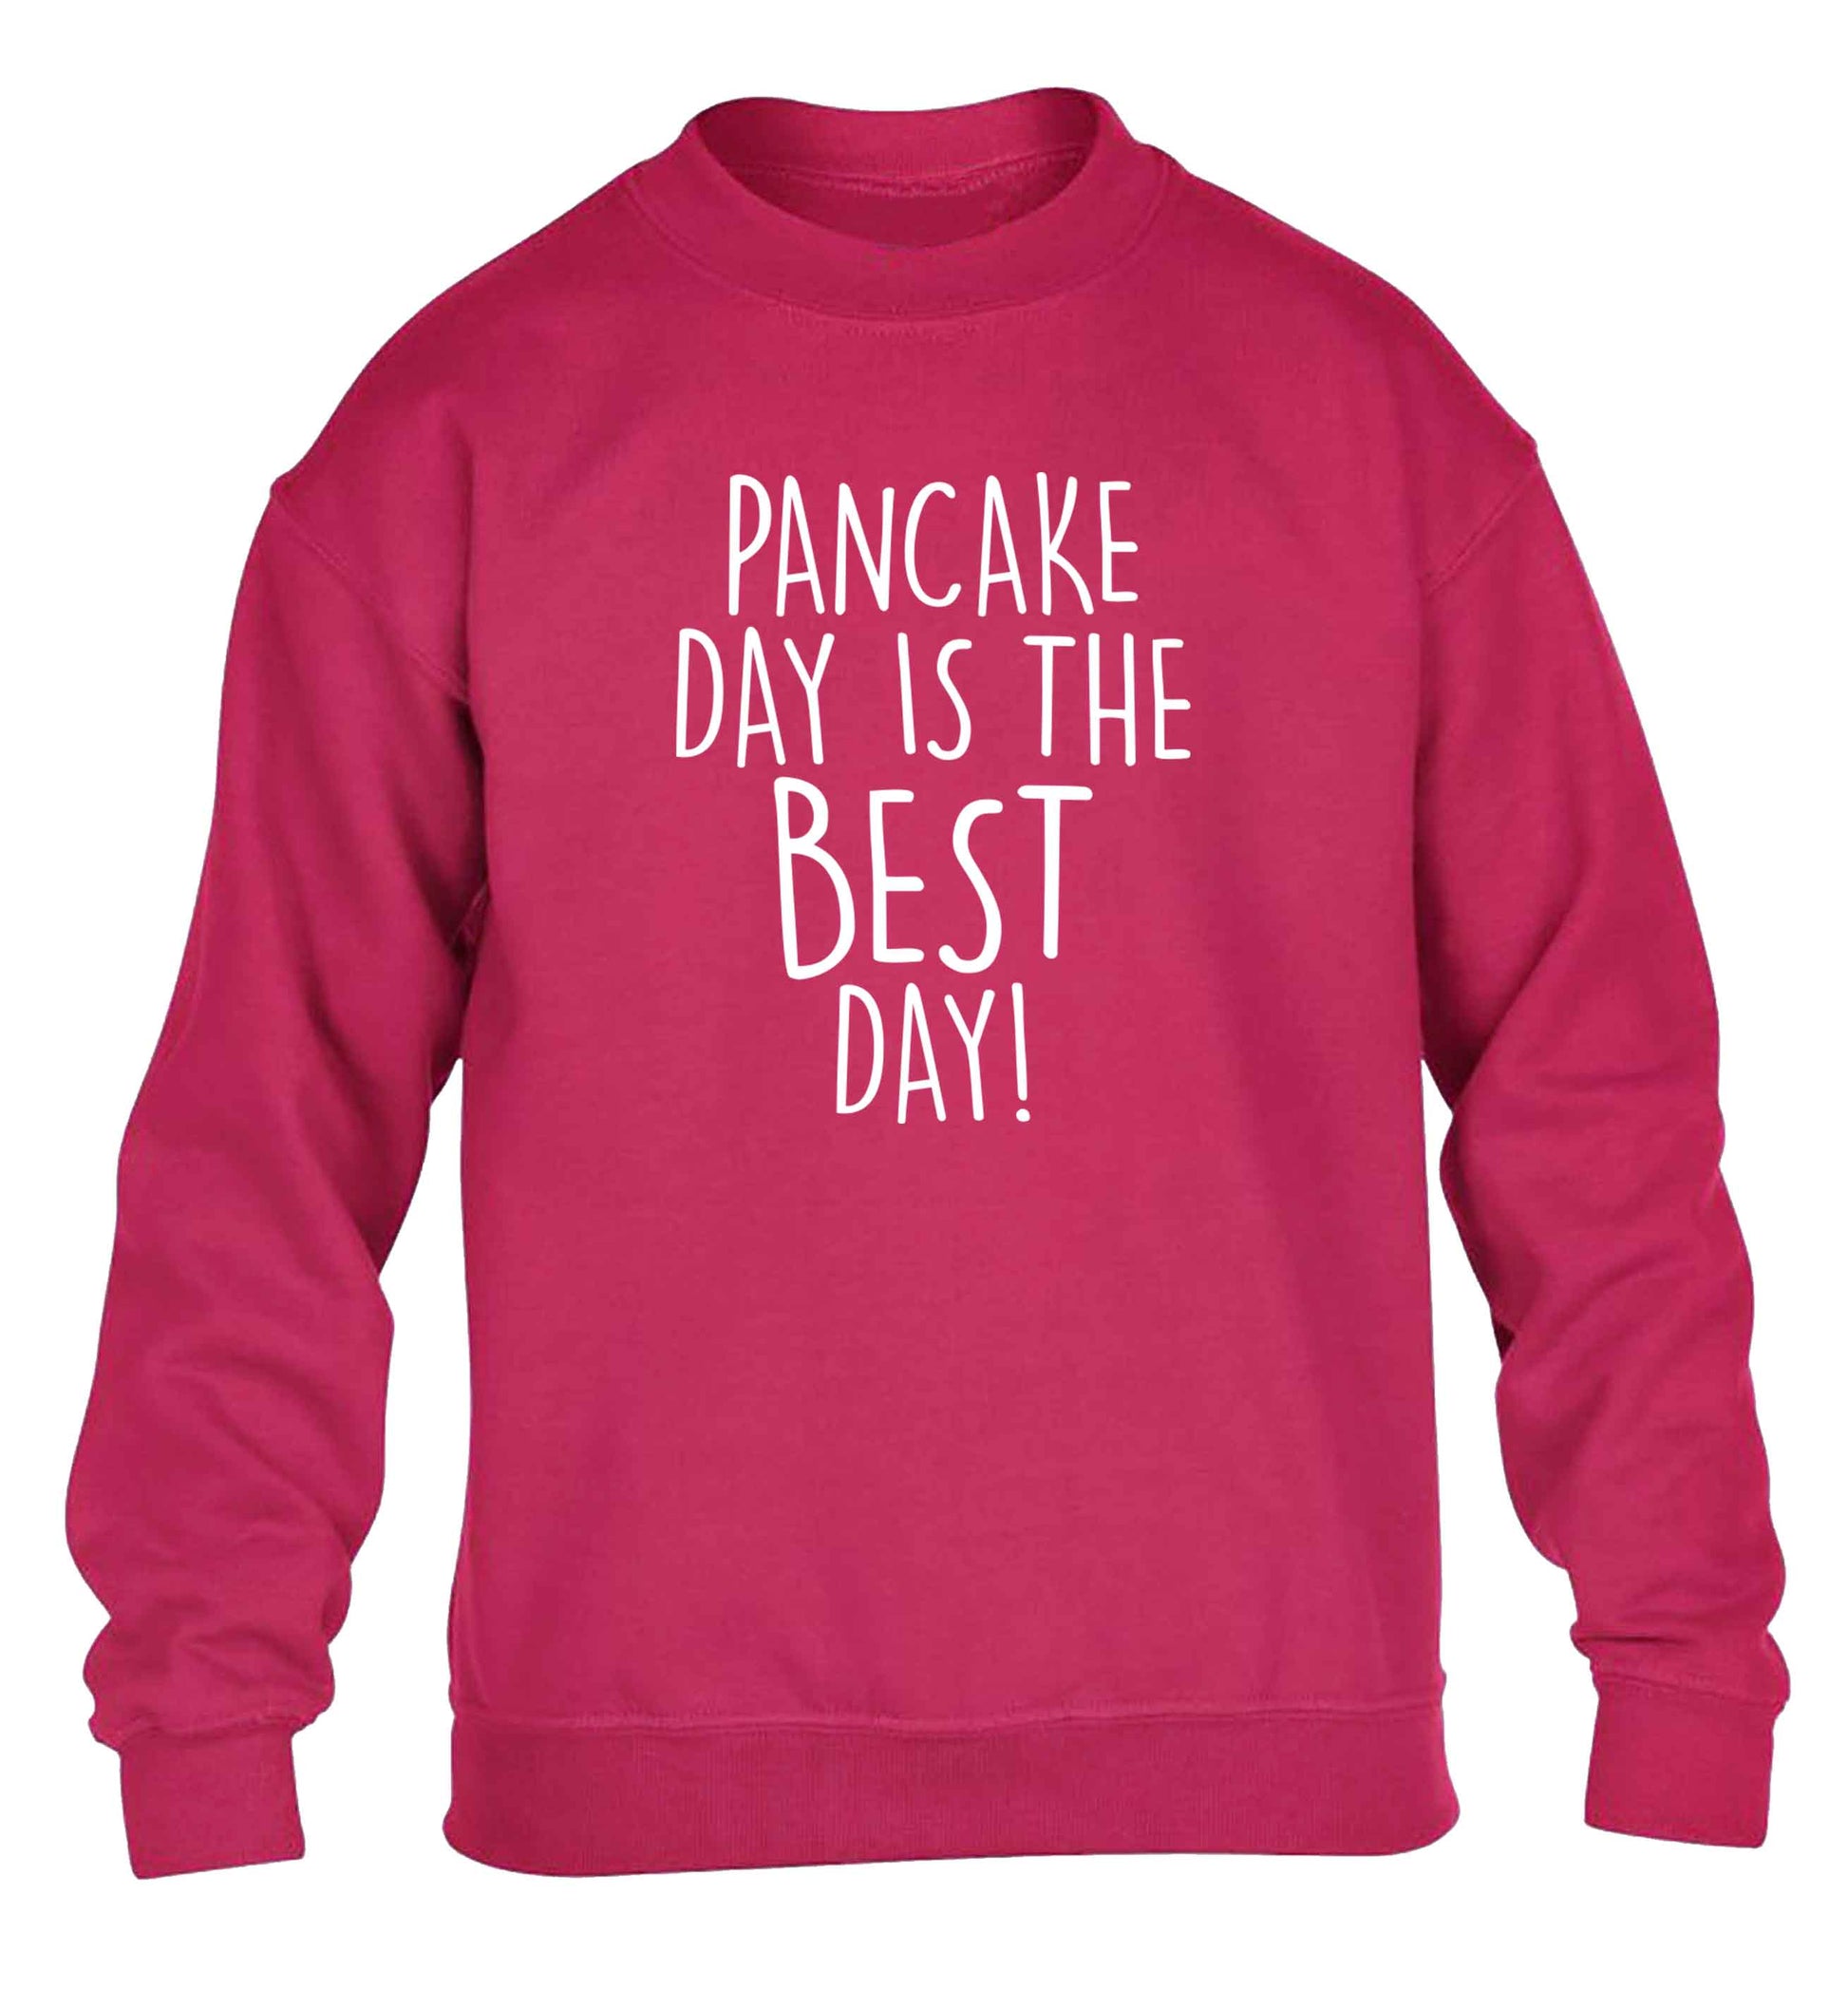 Pancake day is the best day children's pink sweater 12-13 Years